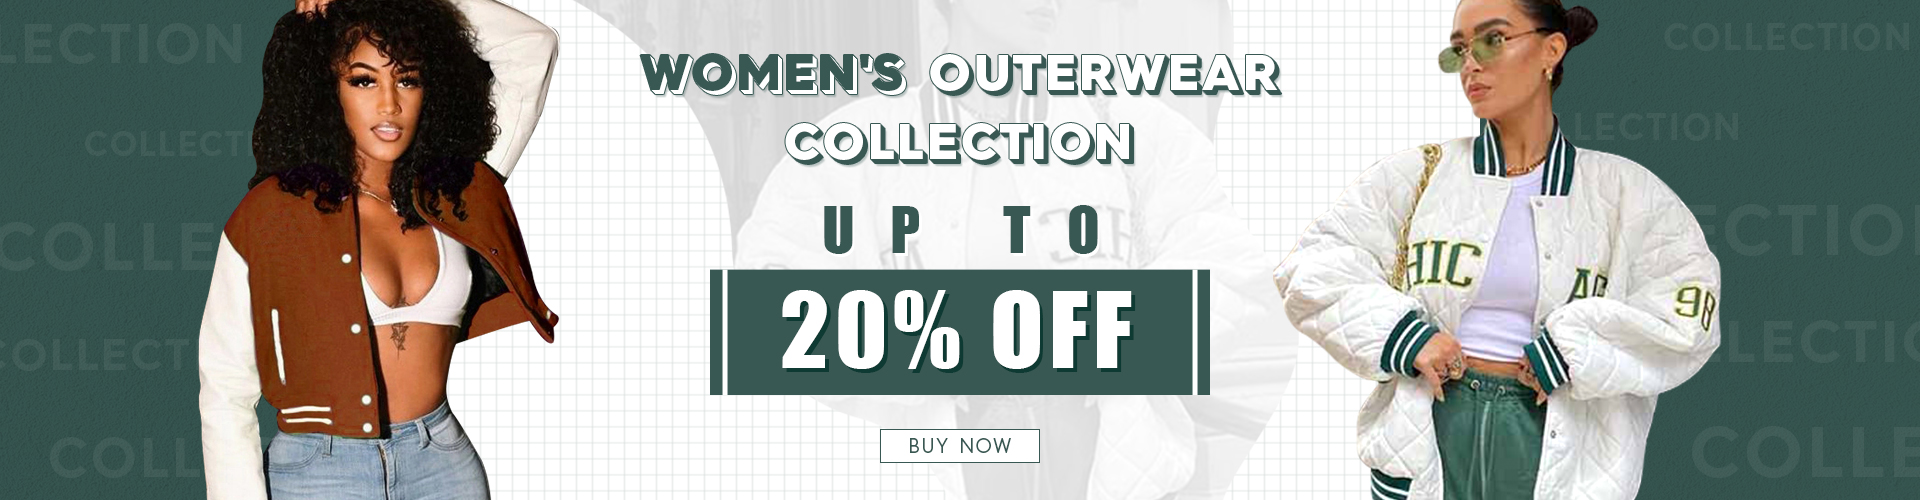 Women's Outerwear Collection